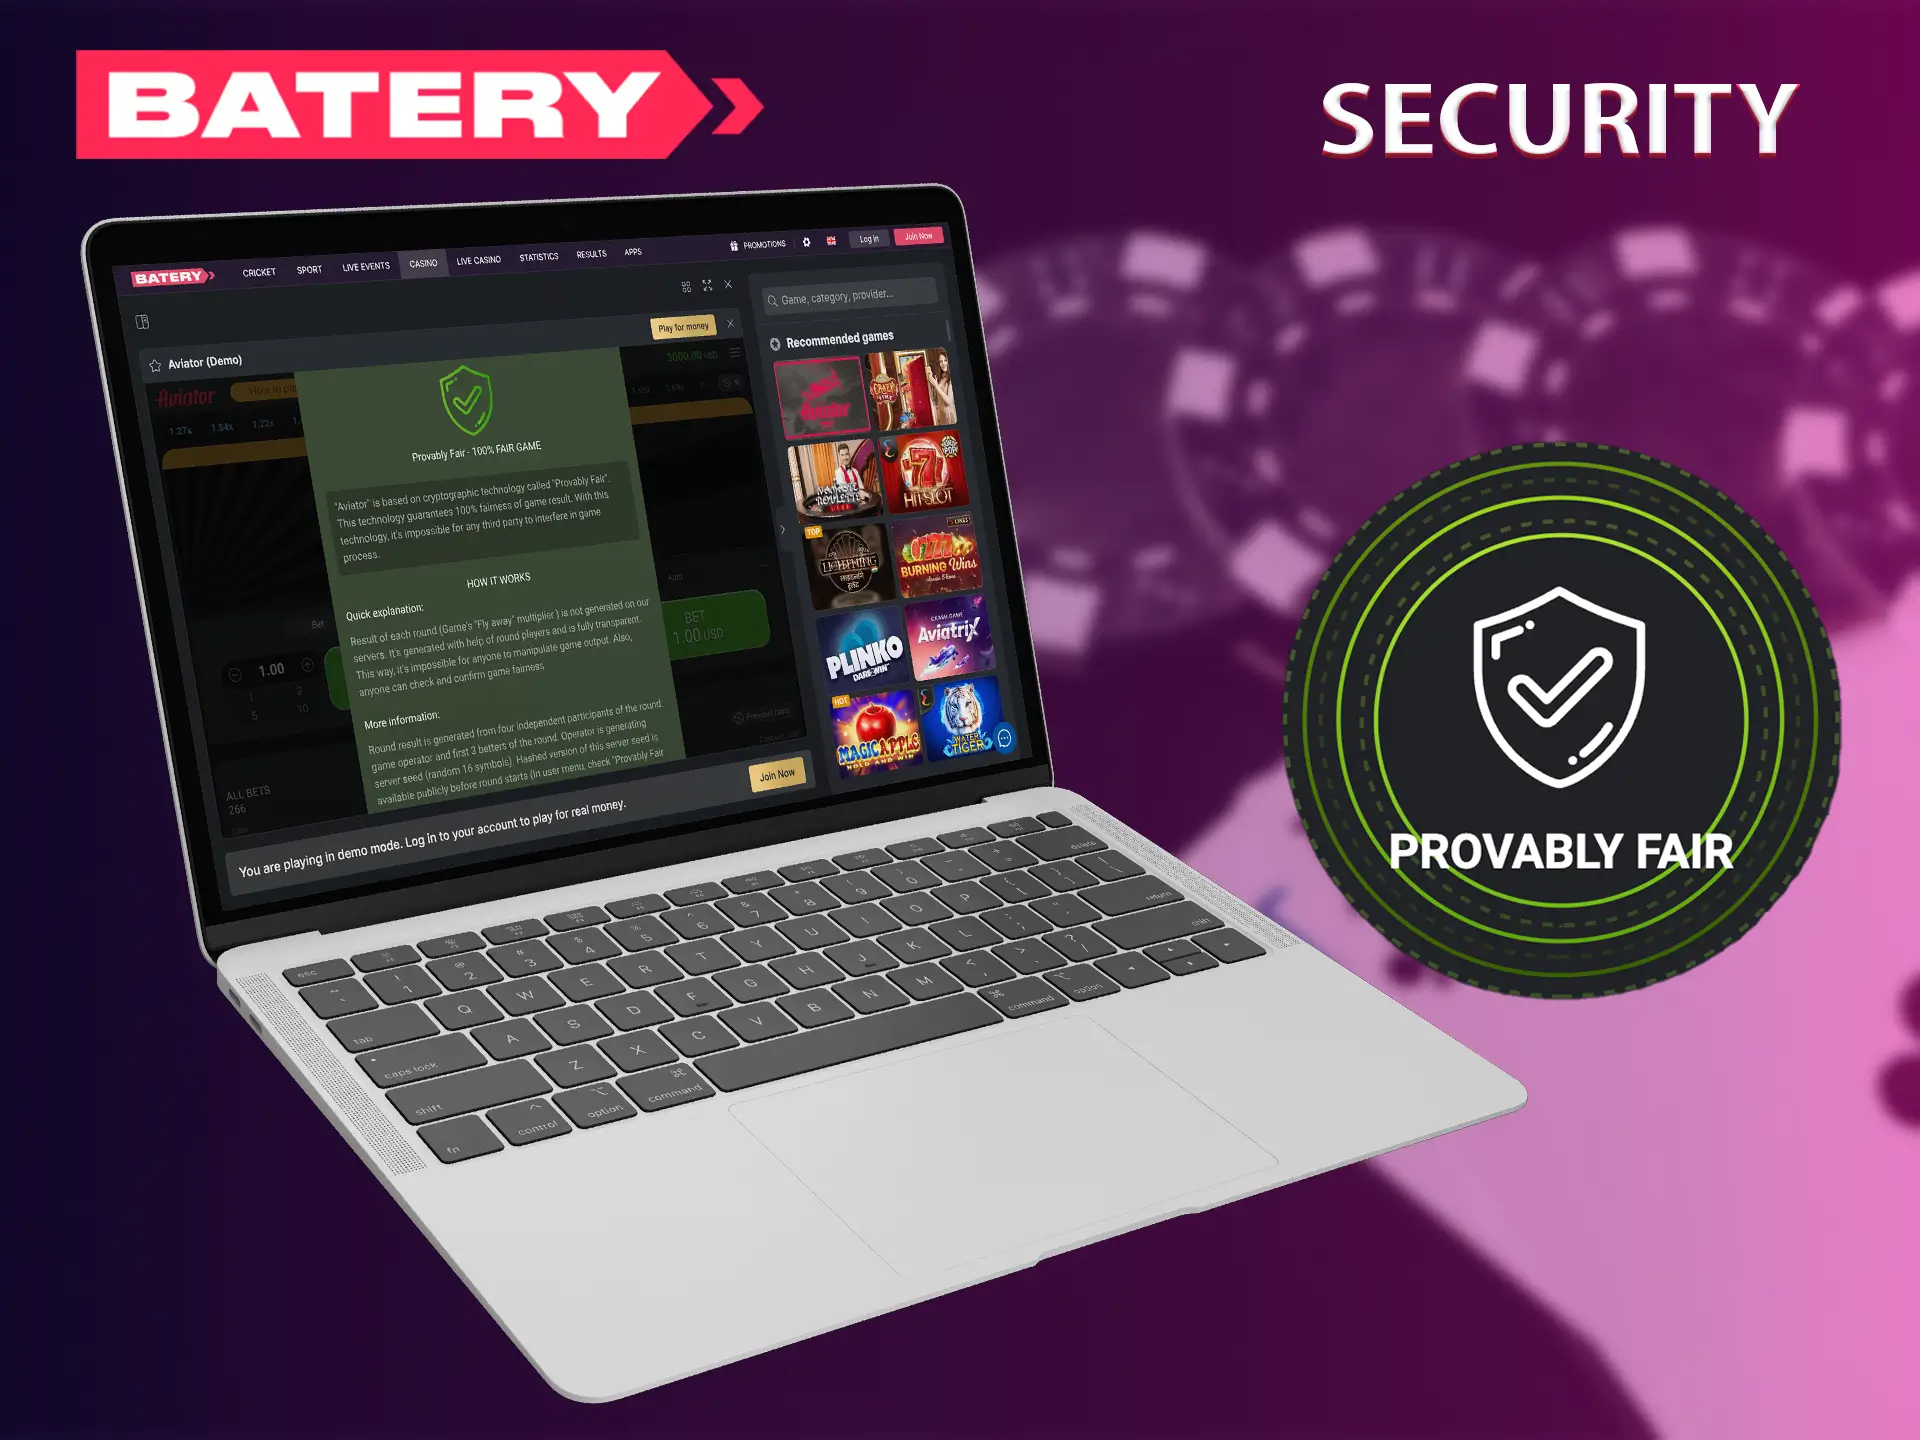 Players choose Batery Casino because here you can find transparent statistics and security.